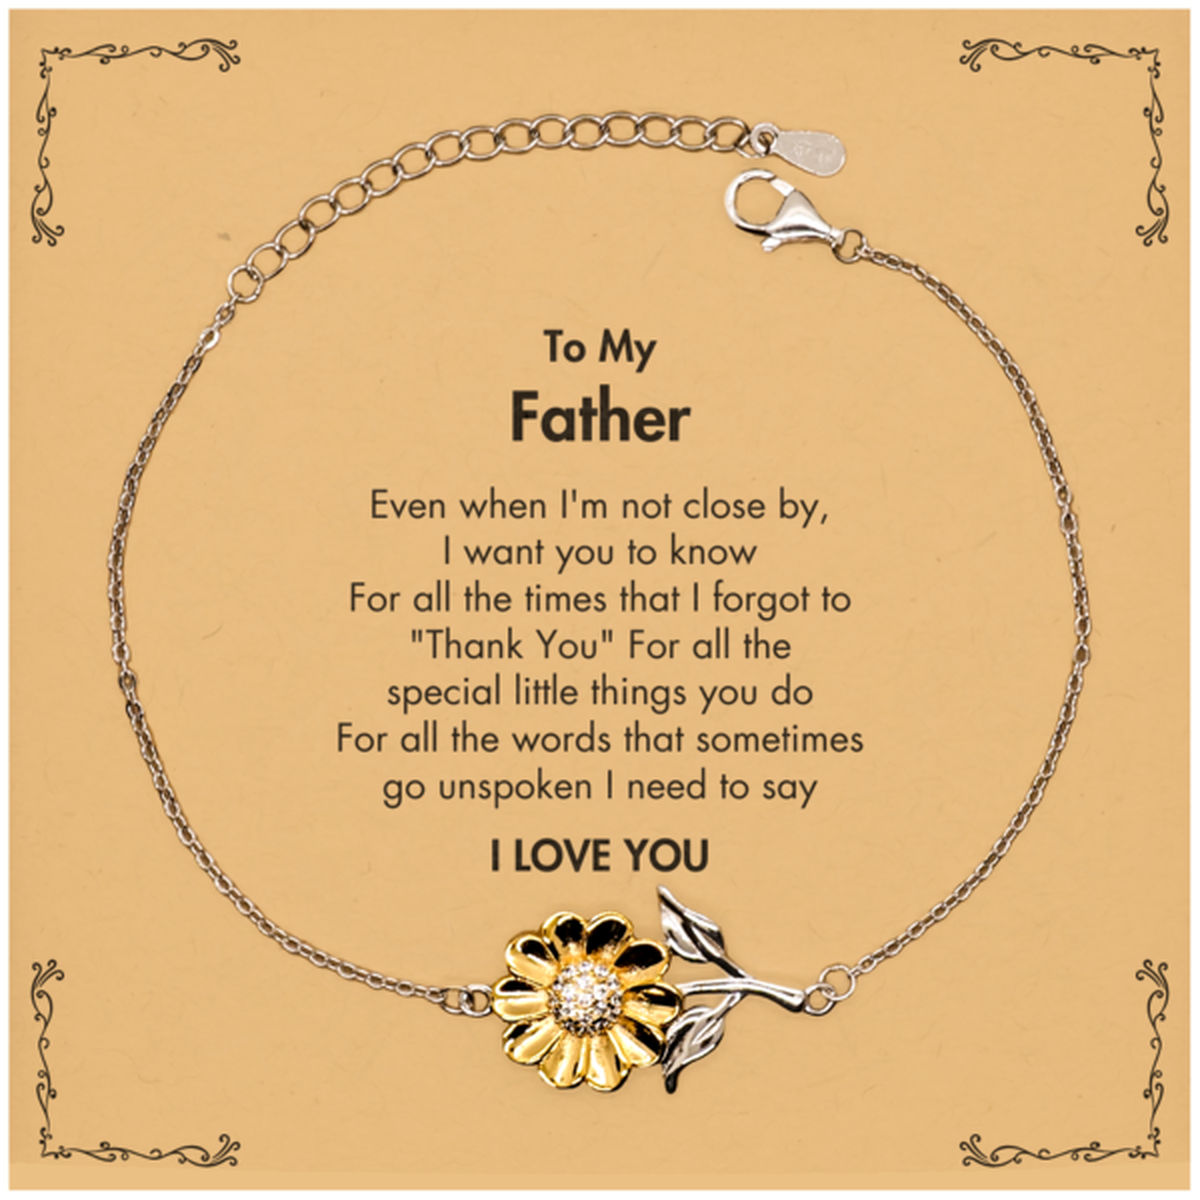 Thank You Gifts for Father, Keepsake Sunflower Bracelet Gifts for Father Birthday Mother's day Father's Day Father For all the words That sometimes go unspoken I need to say I LOVE YOU